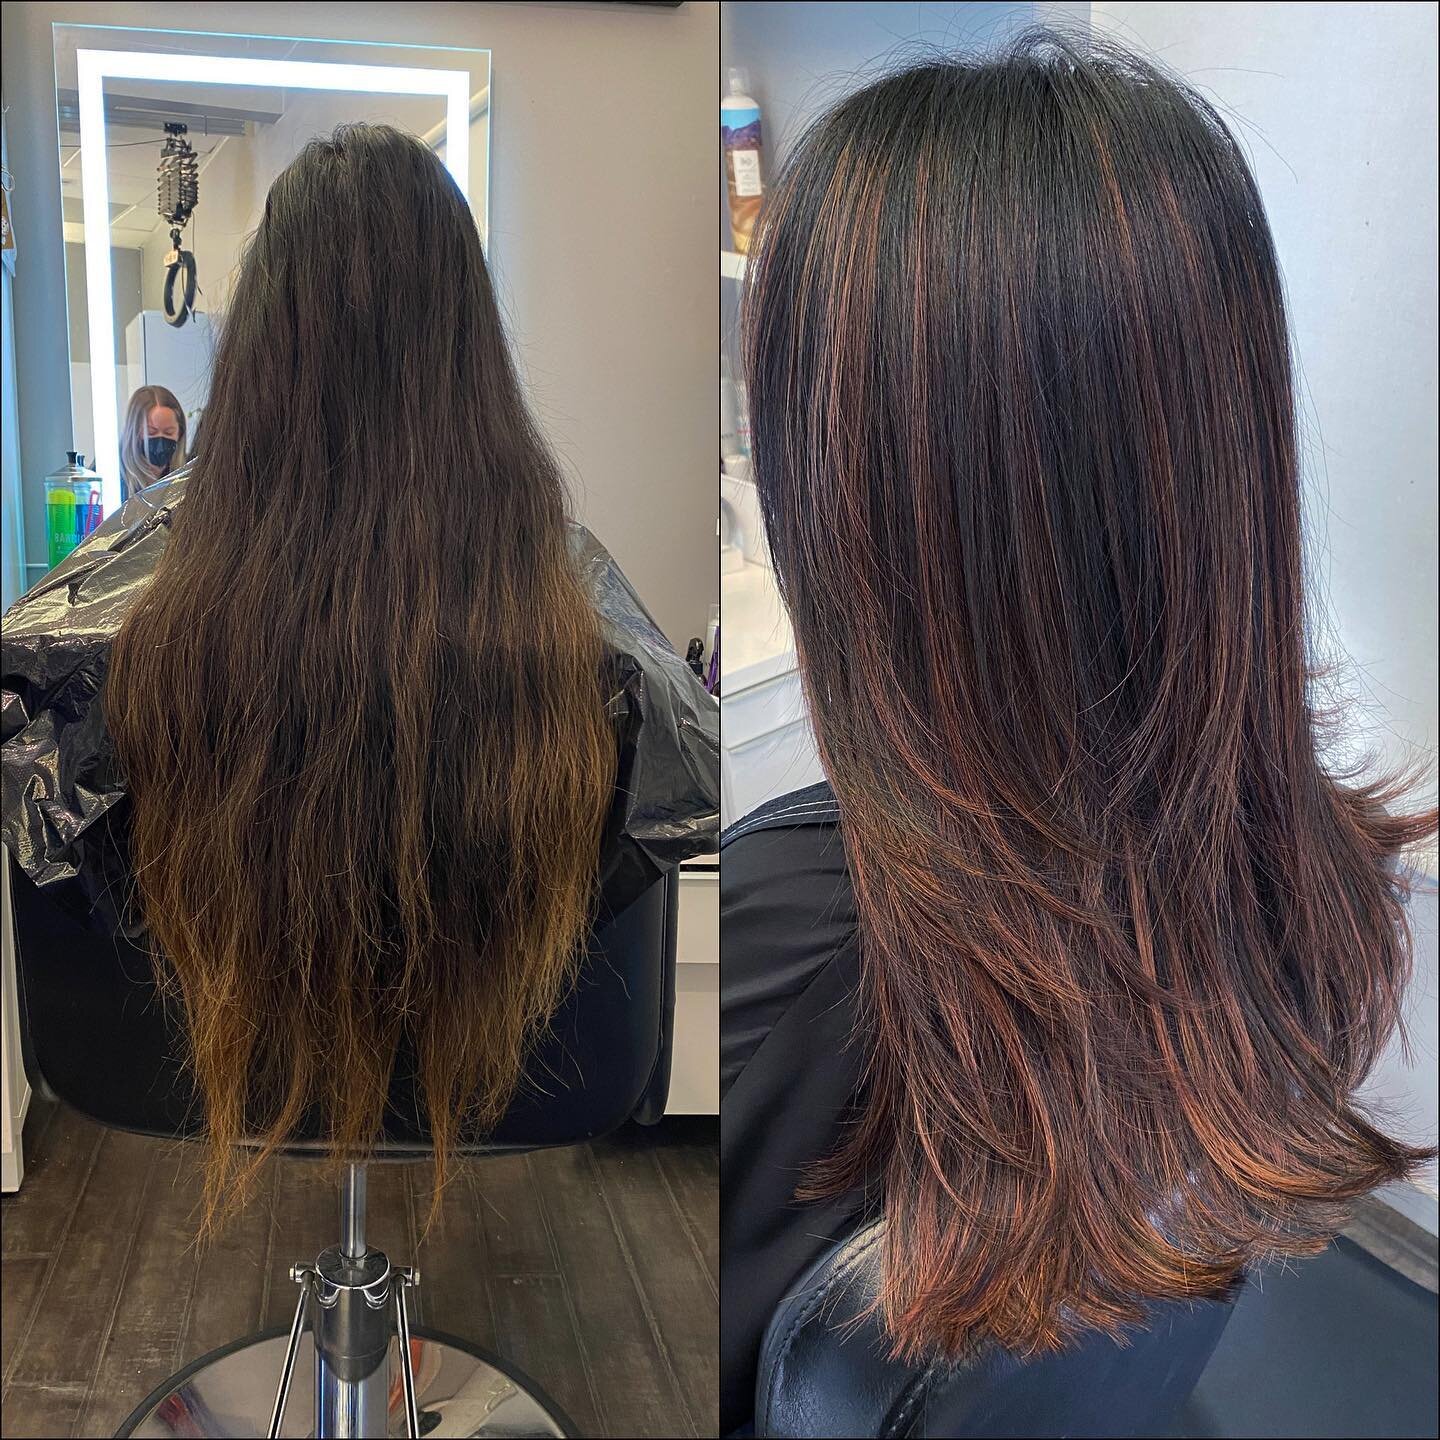 ITS FALL Y&rsquo;ALL! 🍂🍁 time for good cuts and Cherry Cola Red Wine tones. This was an all day sesh with new mom Erin. She hadn&rsquo;t had a cut since Jan 2020!!! We did a make over by cutting off almost 18 inches of hair and doing a heavy ombre 